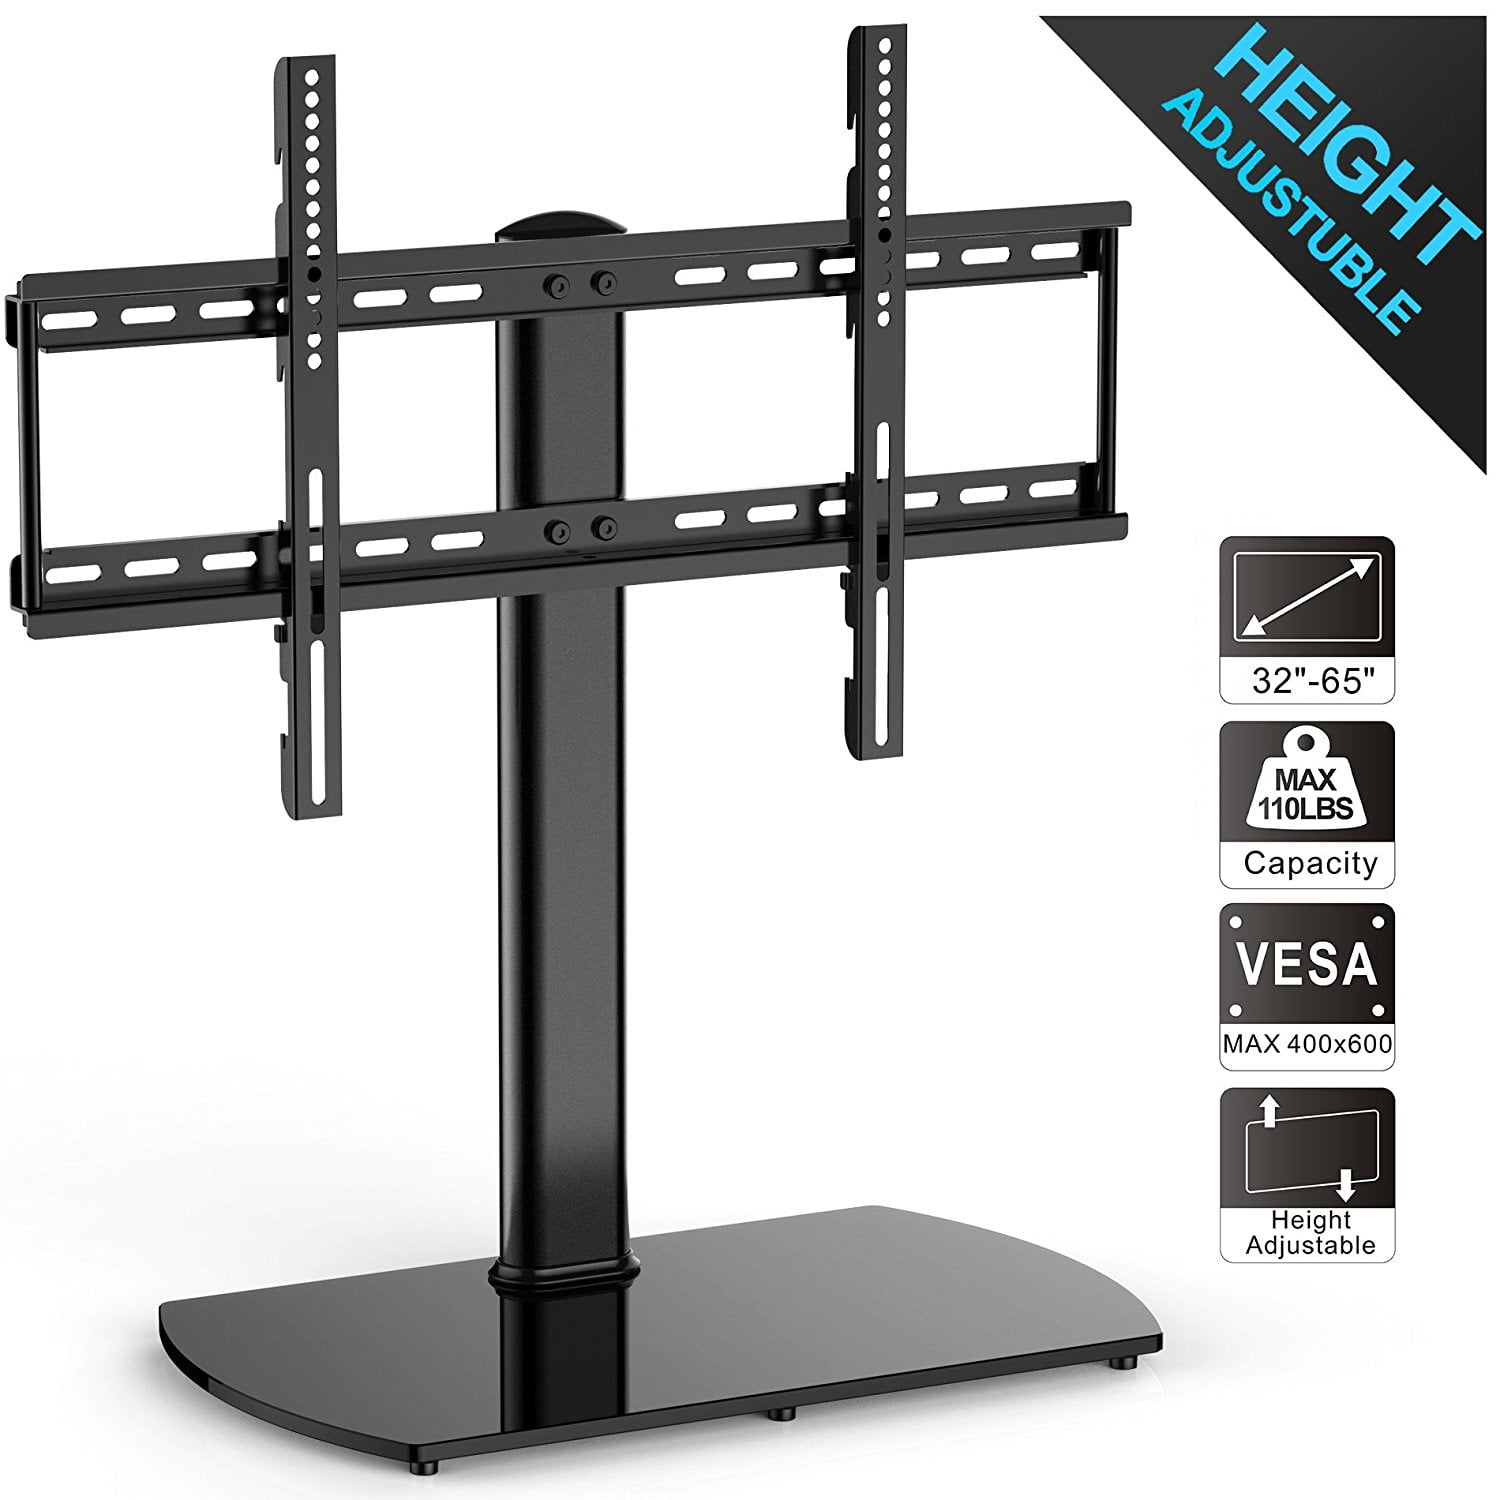 Universal TV Stand with table top Mount for 32-60" Sharp Vizio LG LCD LED TV